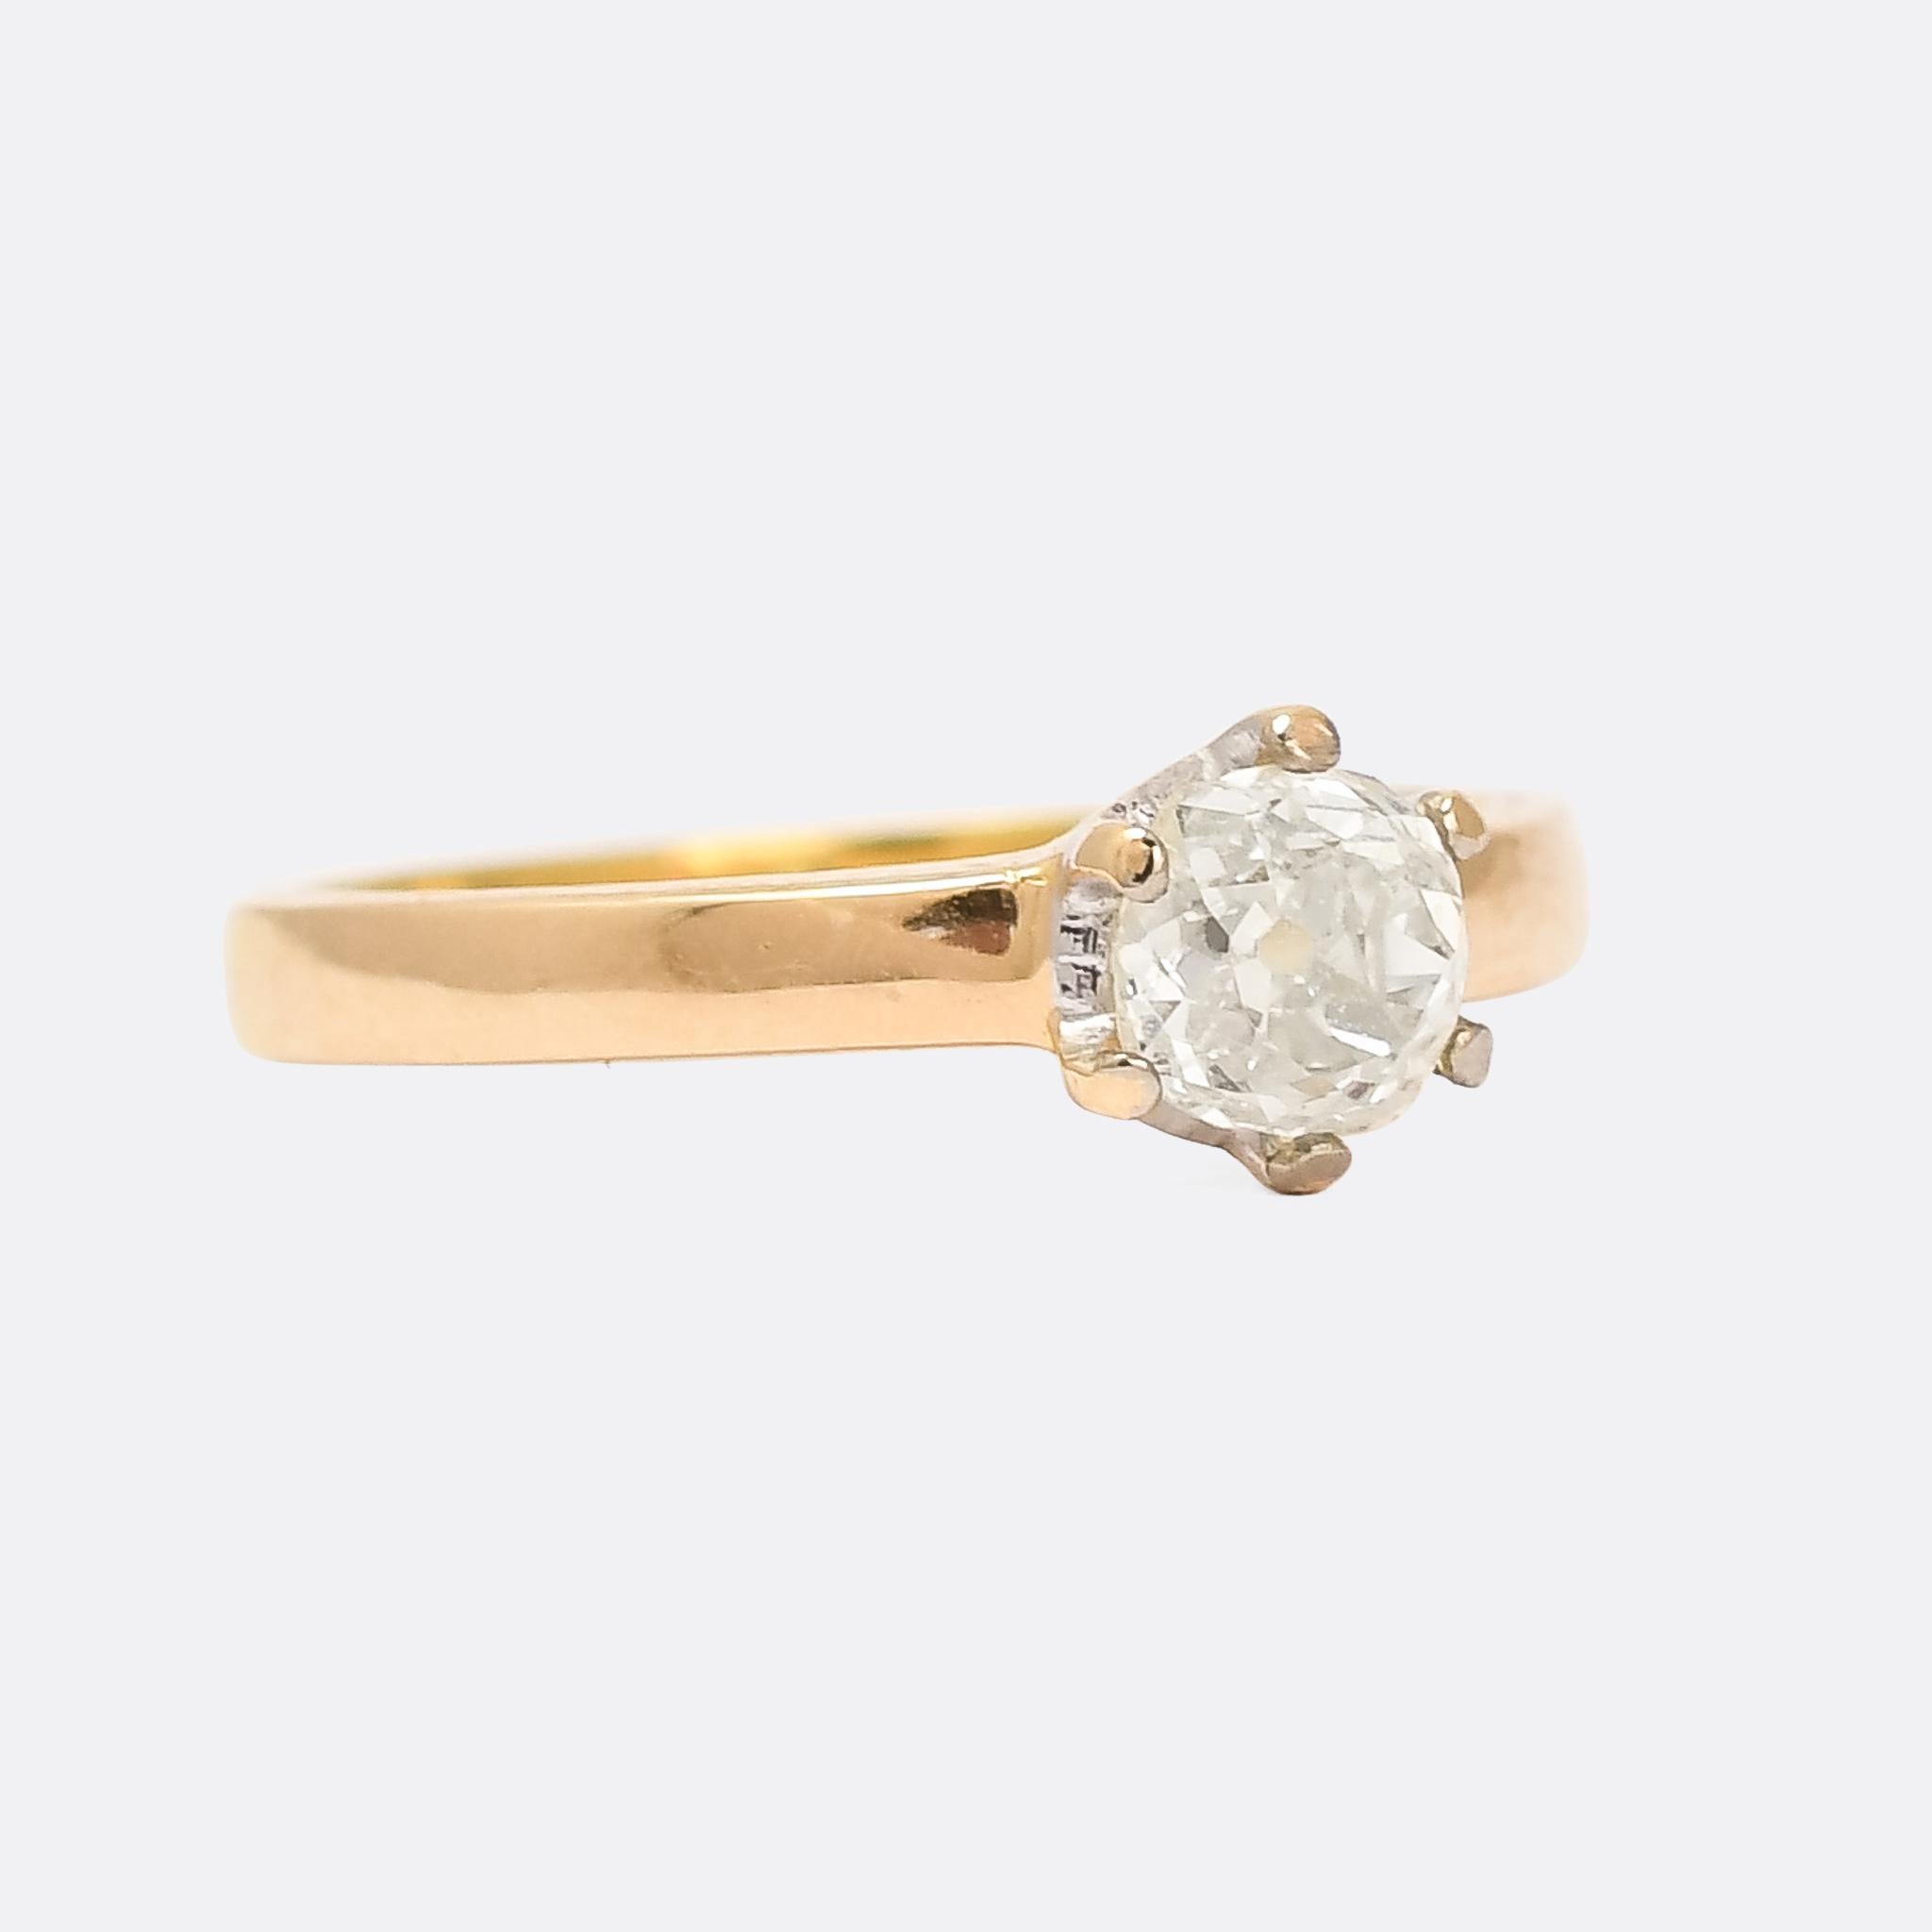 A simple claw-set diamond solitaire engagement ring set with the most gorgeous old mine cut diamond. The ring mount is minimal and perfectly proportioned, and, quite unusually, the inside of the claws and basket are finished in platinum, to